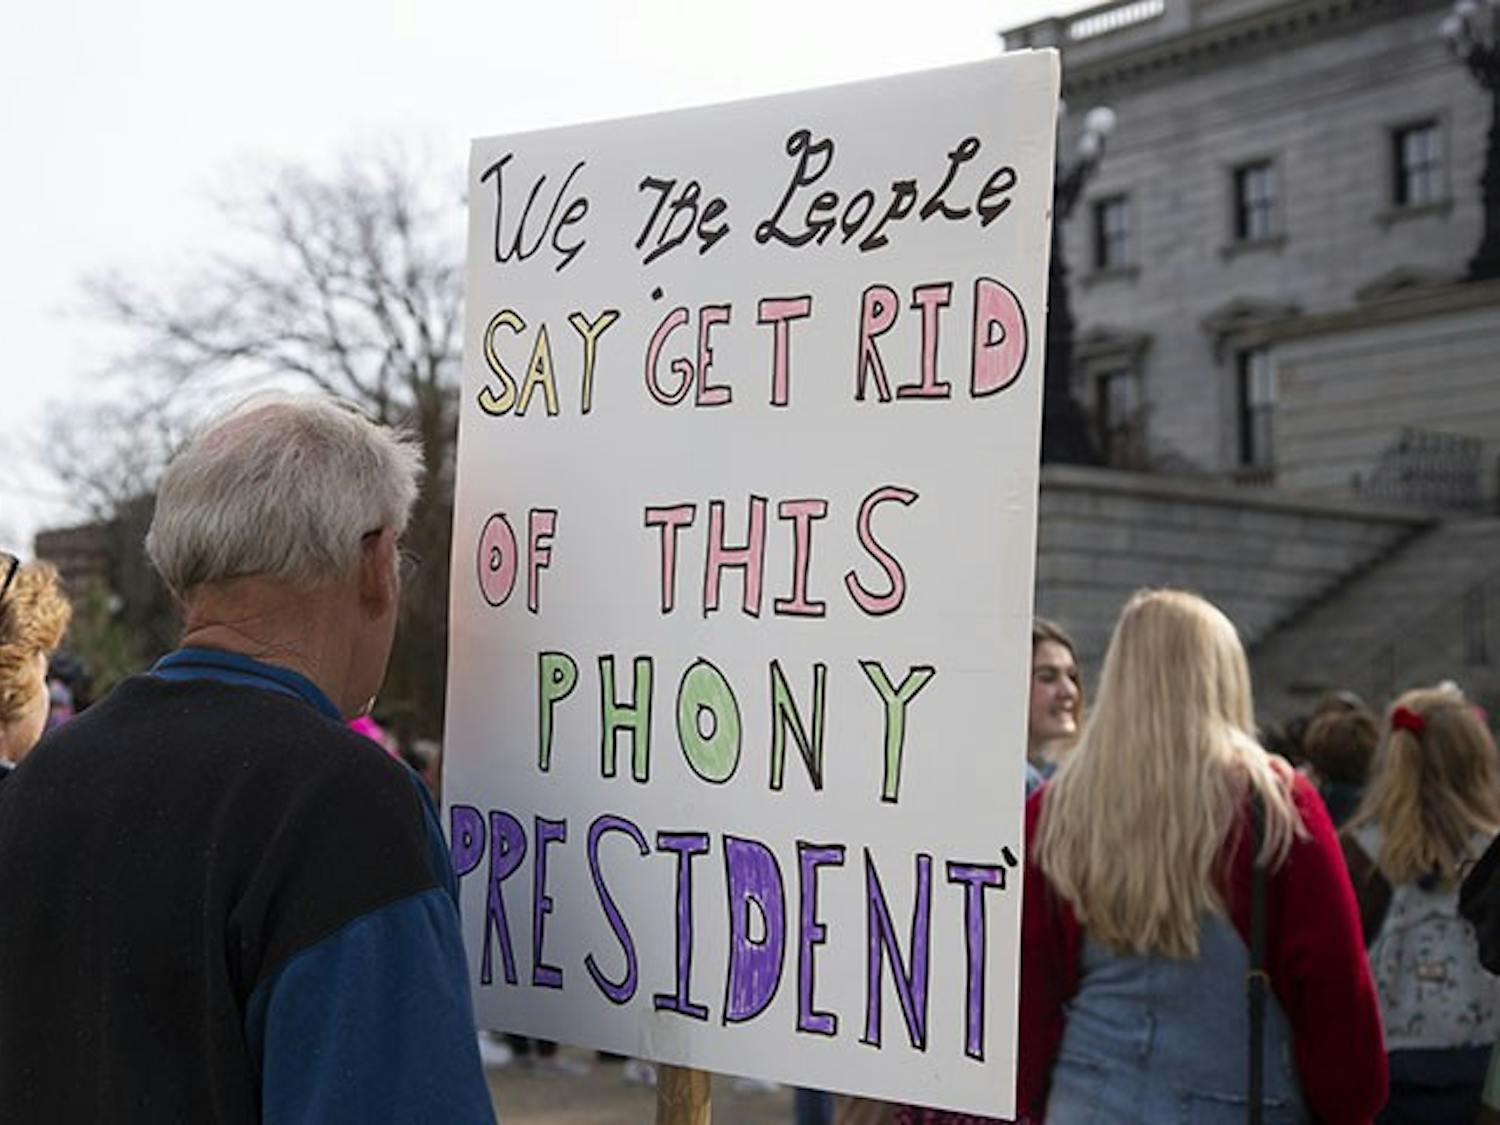 Bruce Sorenson, Retired
The couple from East Over, South Carolina, attended the Women’s March holding signs that showed their opinions on President Trump. Mrs. and Mr. Sorenson believe President Trump is a liar and a phony, as stated on their signs.